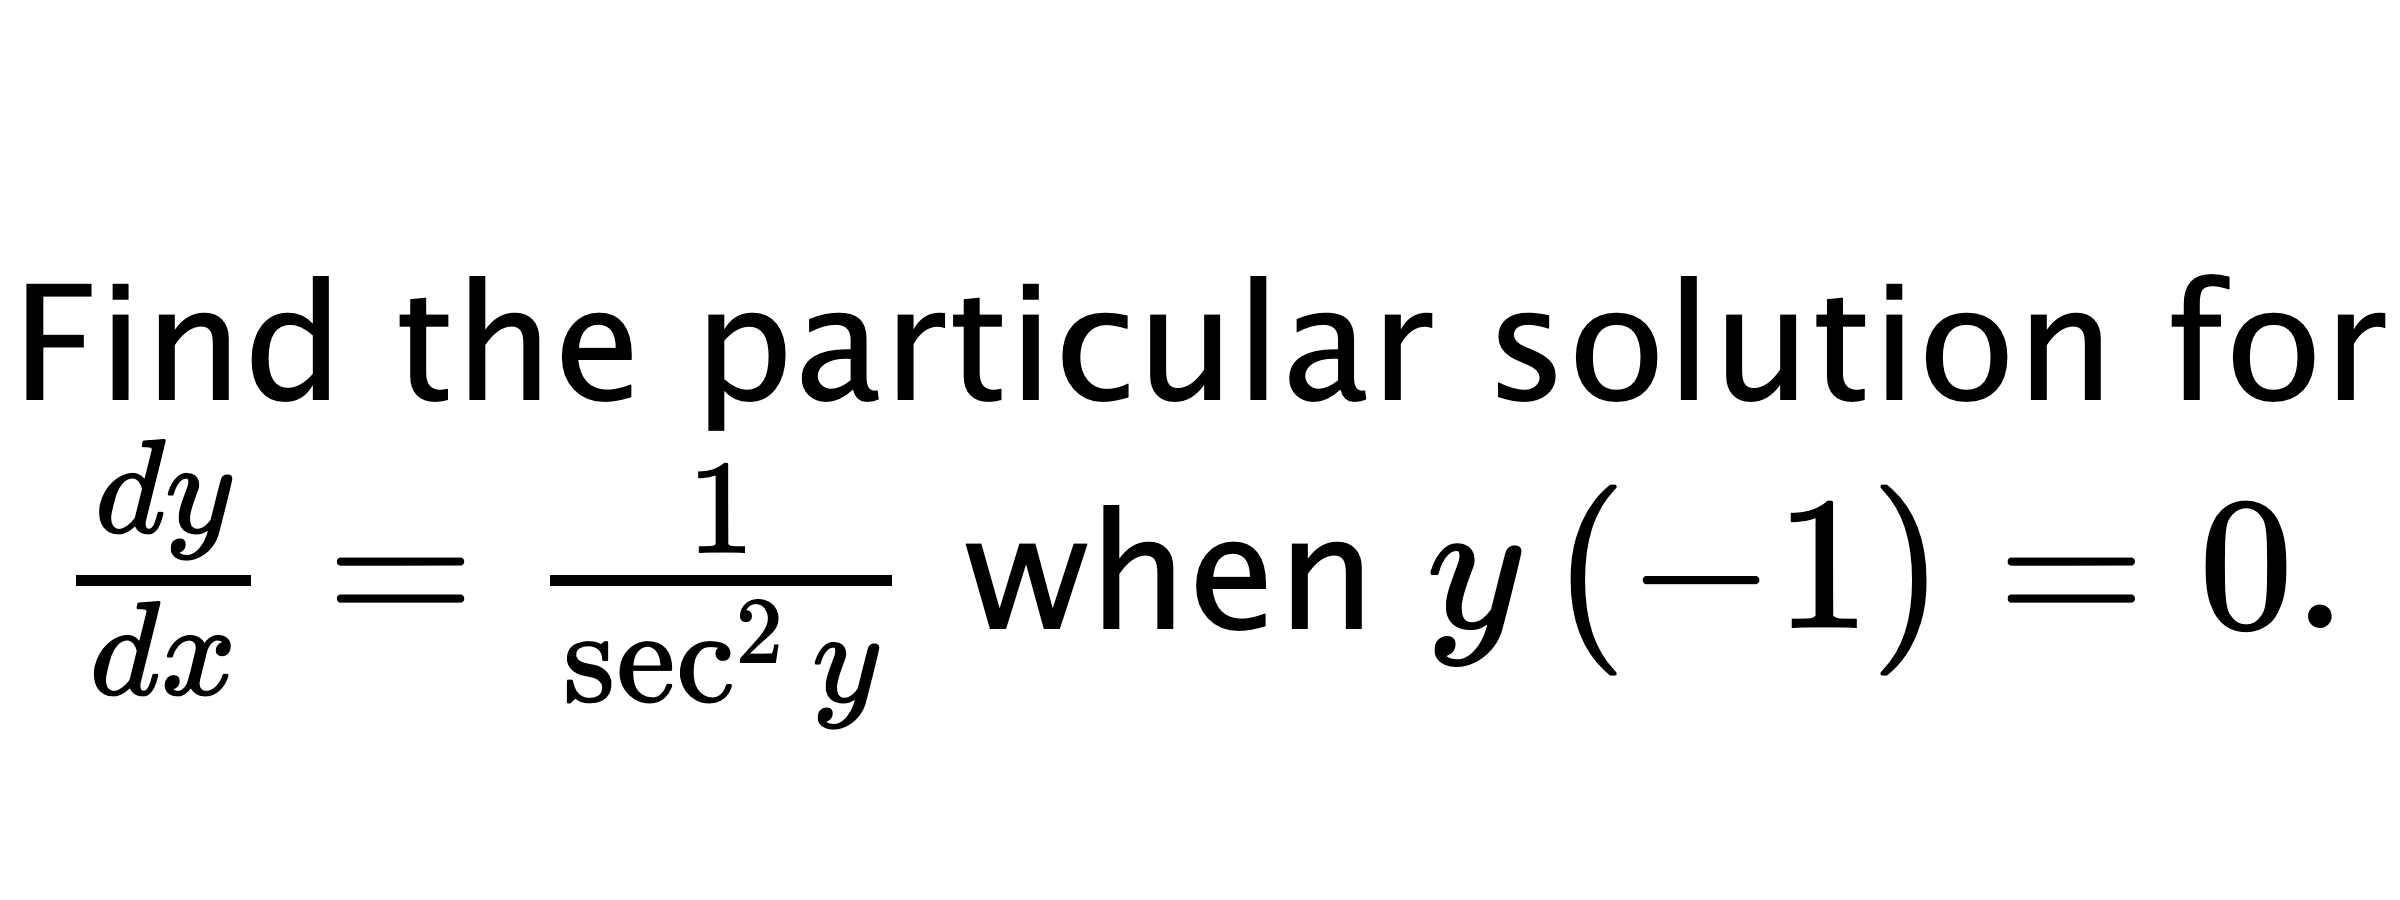  Find the particular solution for $ \frac{dy}{dx}=\frac{1}{\sec^{2}{y}} $ when $ y\left( -1 \right)=0. $